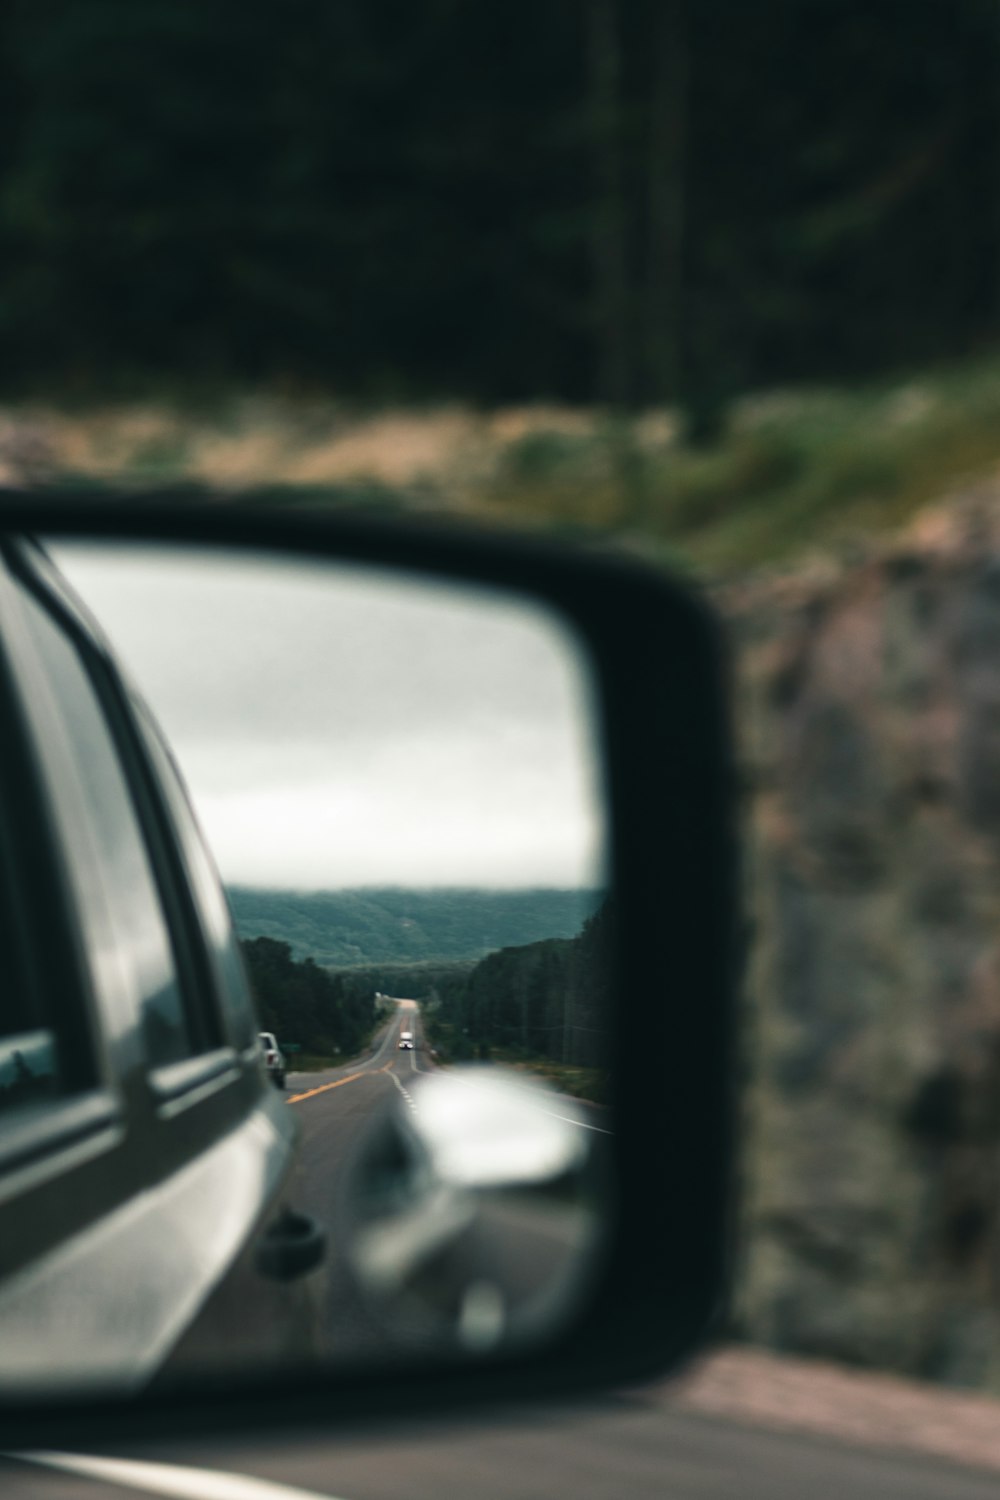 a car's side view mirror on the side of a road